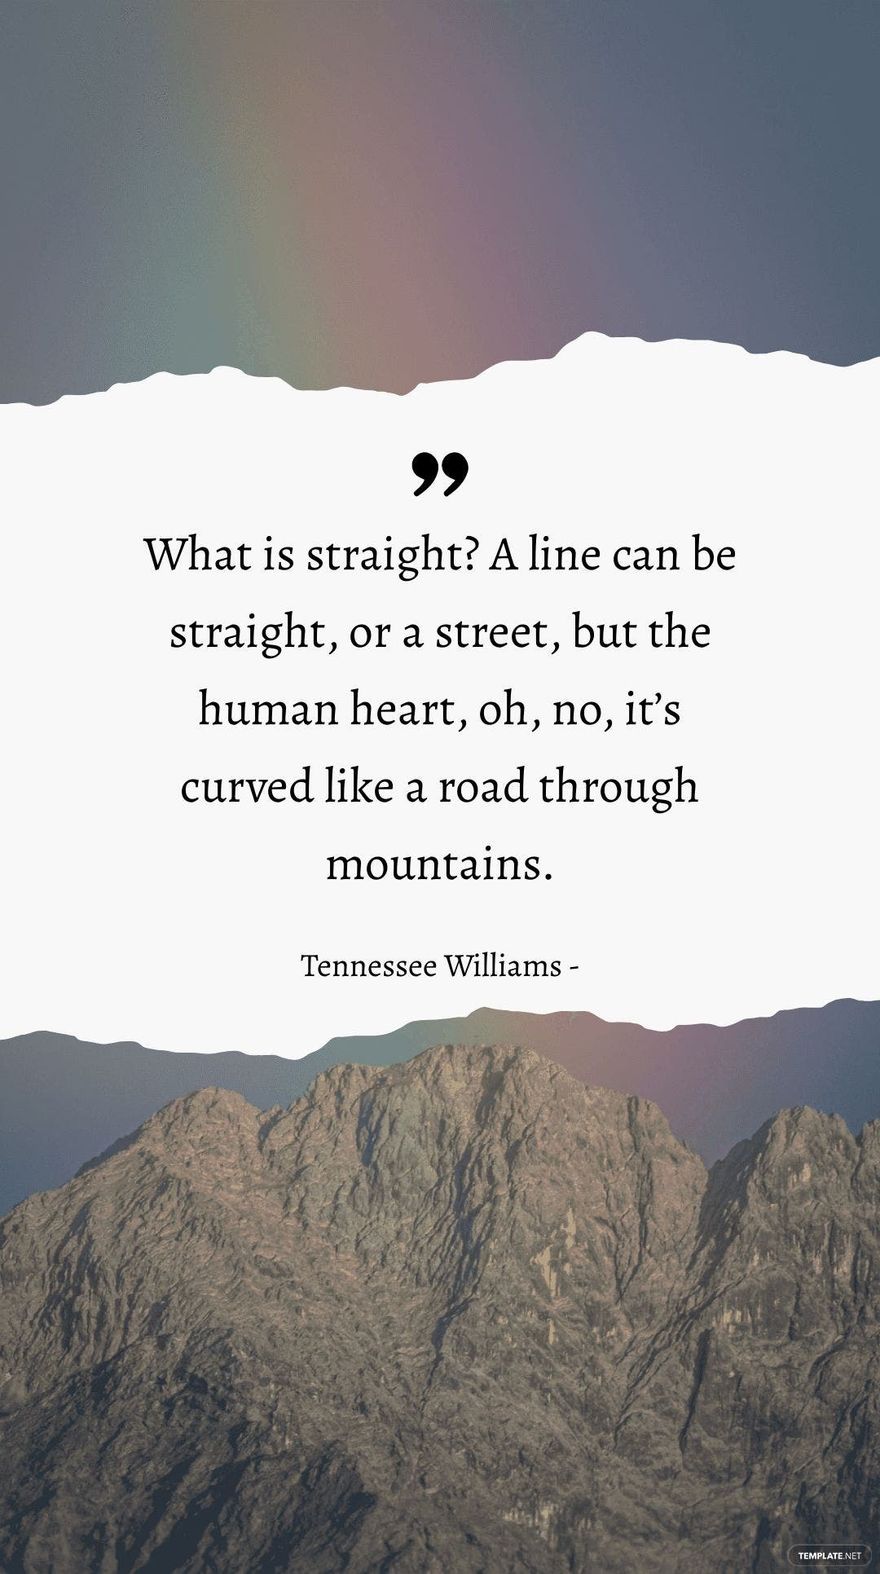 Tennessee Williams - What is straight? A line can be straight, or a street, but the human heart, oh, no, it’s curved like a road through mountains.